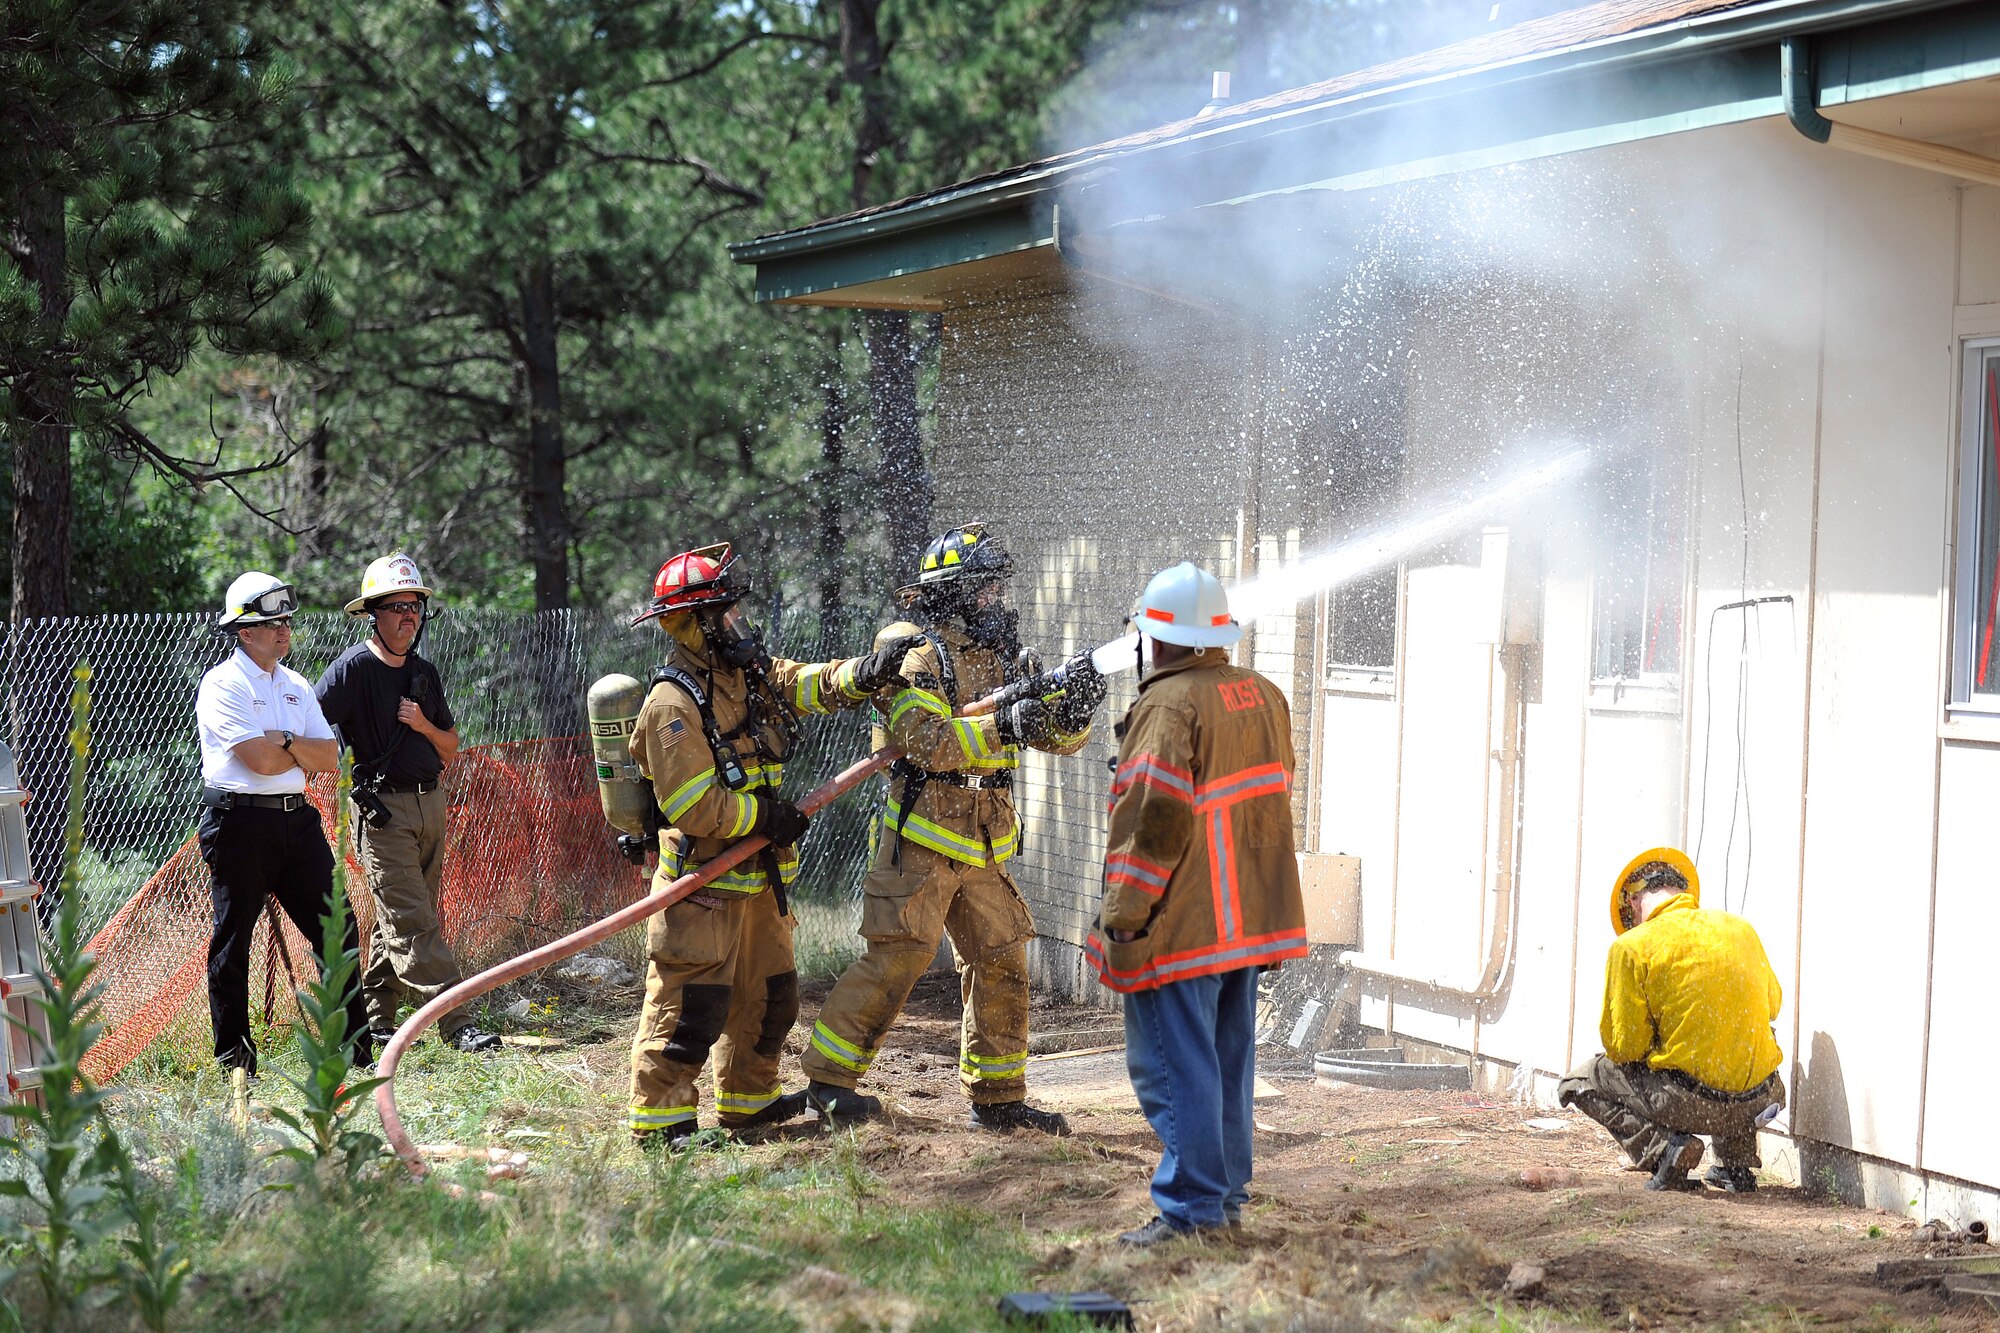 Firefighters with the 10th Civil Engineer Squadron fire department, as well as neighboring fire departments in Colorado Springs participated in a two-day live-fire exercise in Pine Valley housing here. (U.S. Air Force photo/Jason Gutierrez)